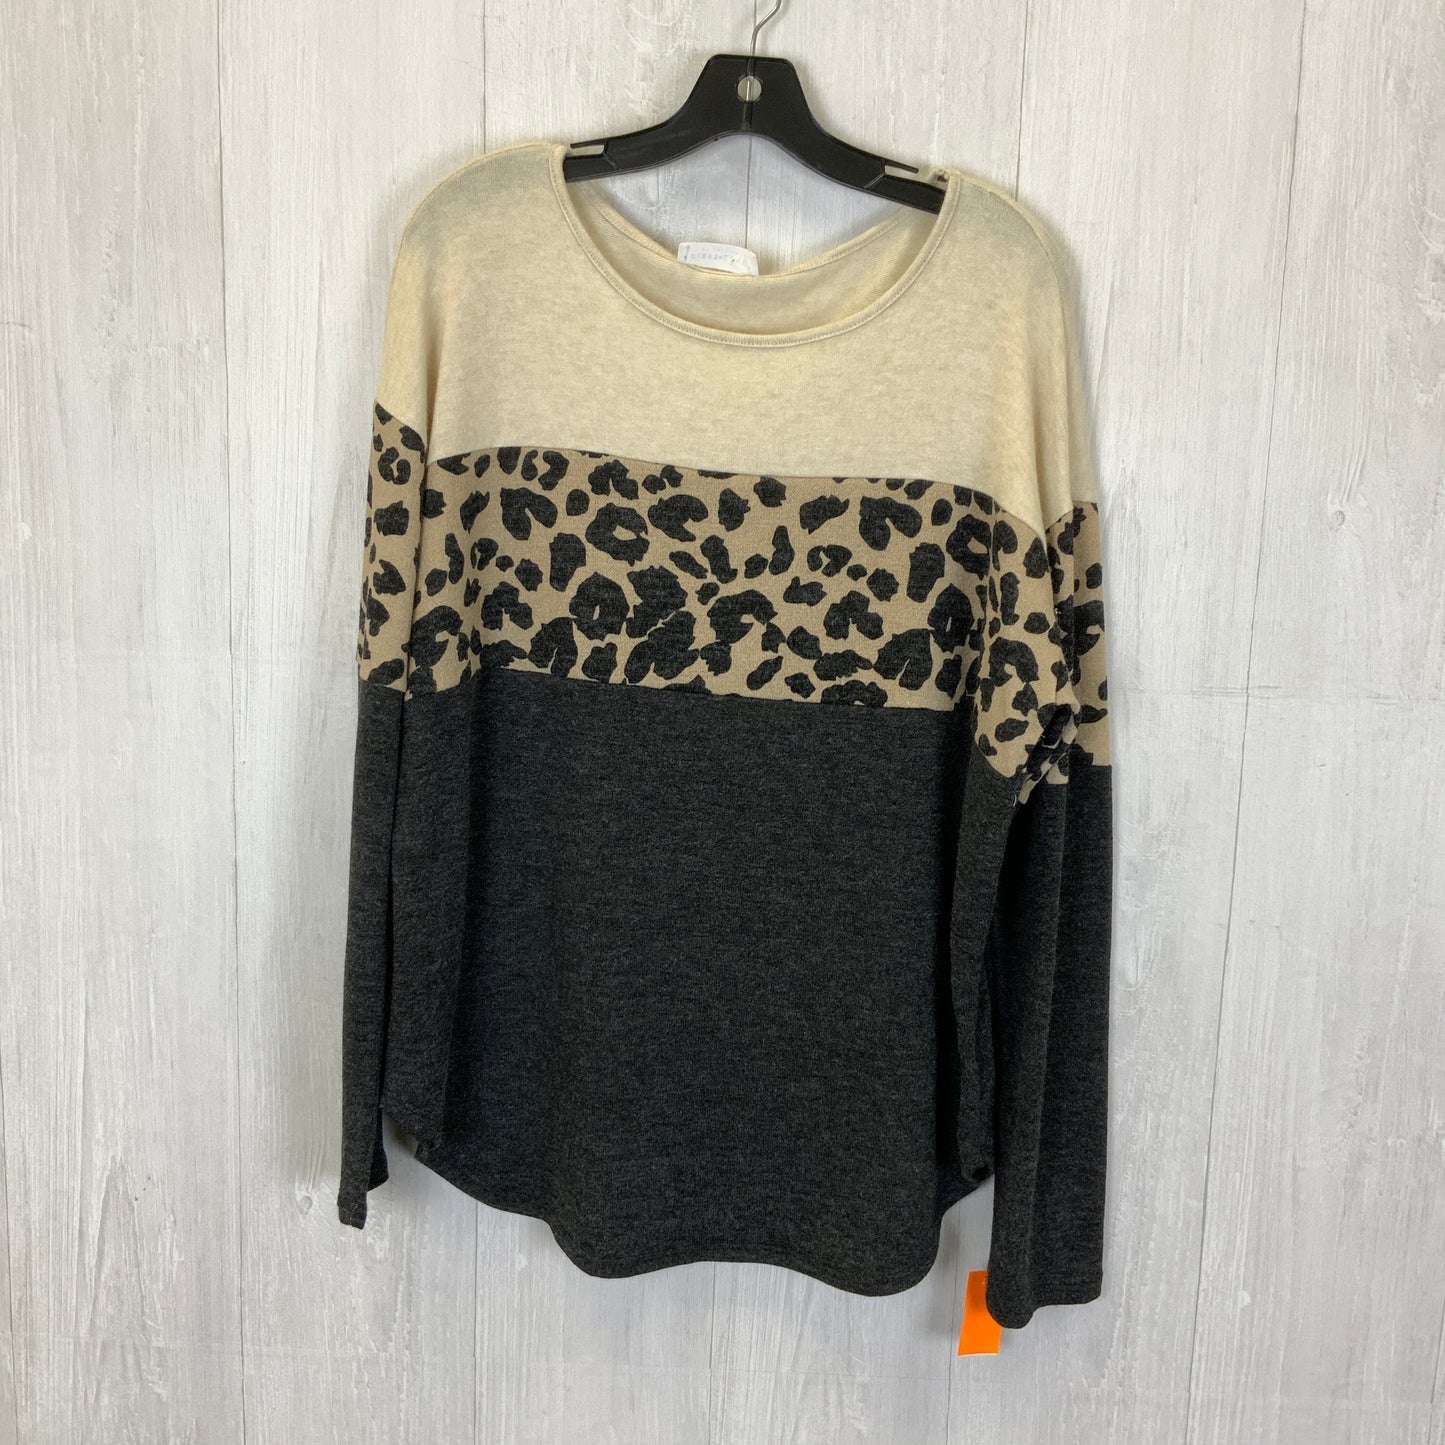 Leopard Print Top Long Sleeve First Love, Size L